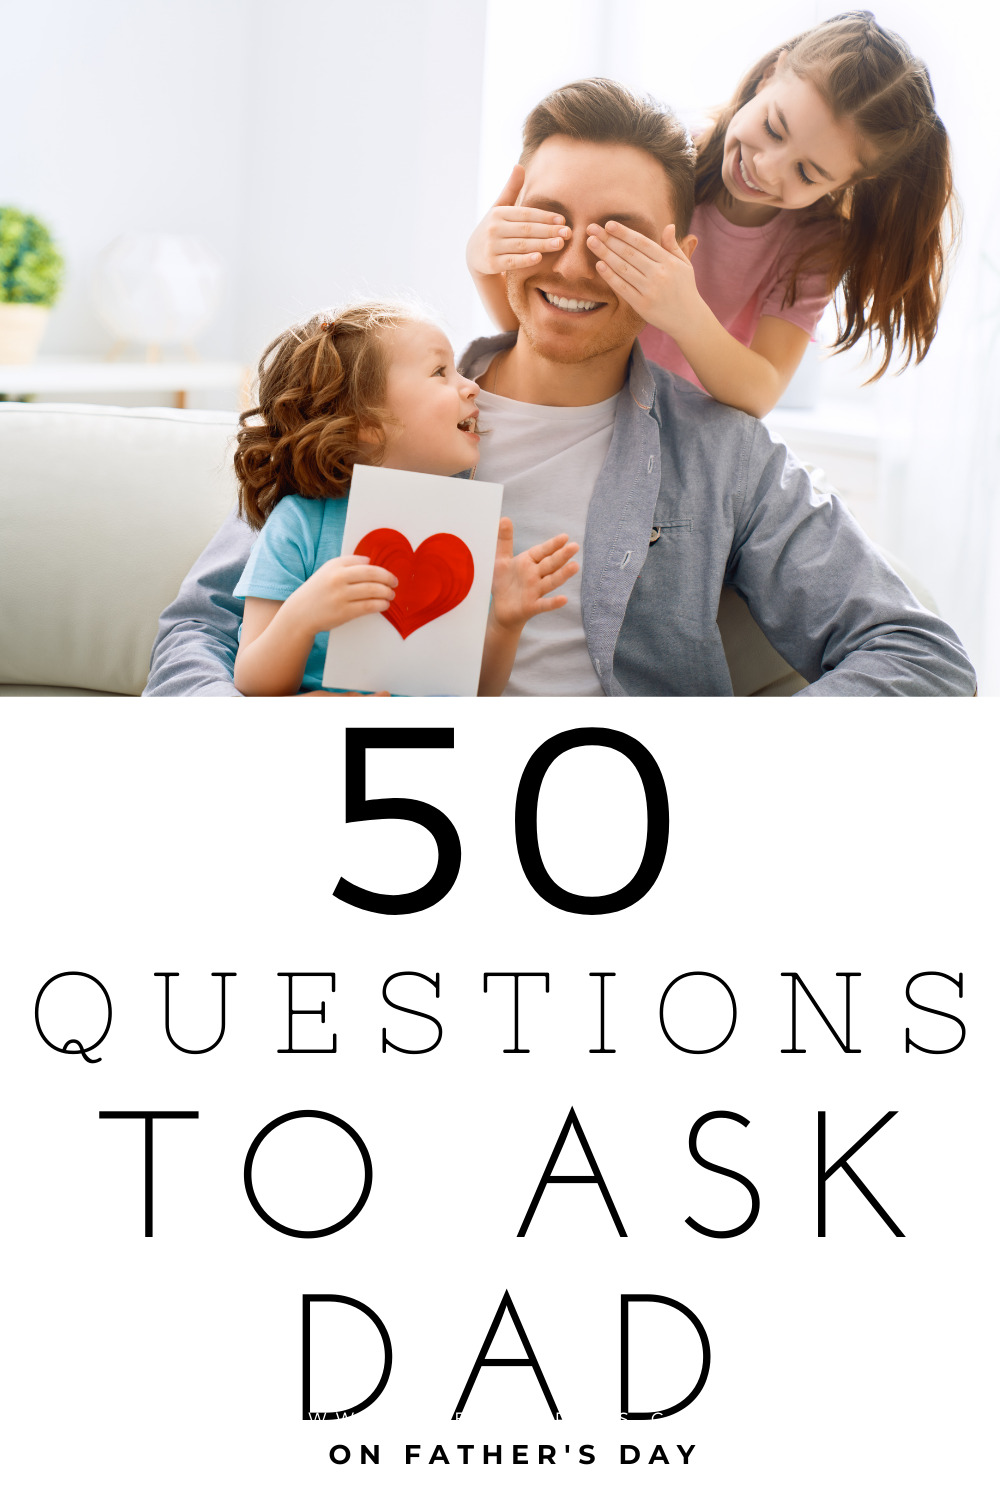 50 Questions To Ask Your Dad